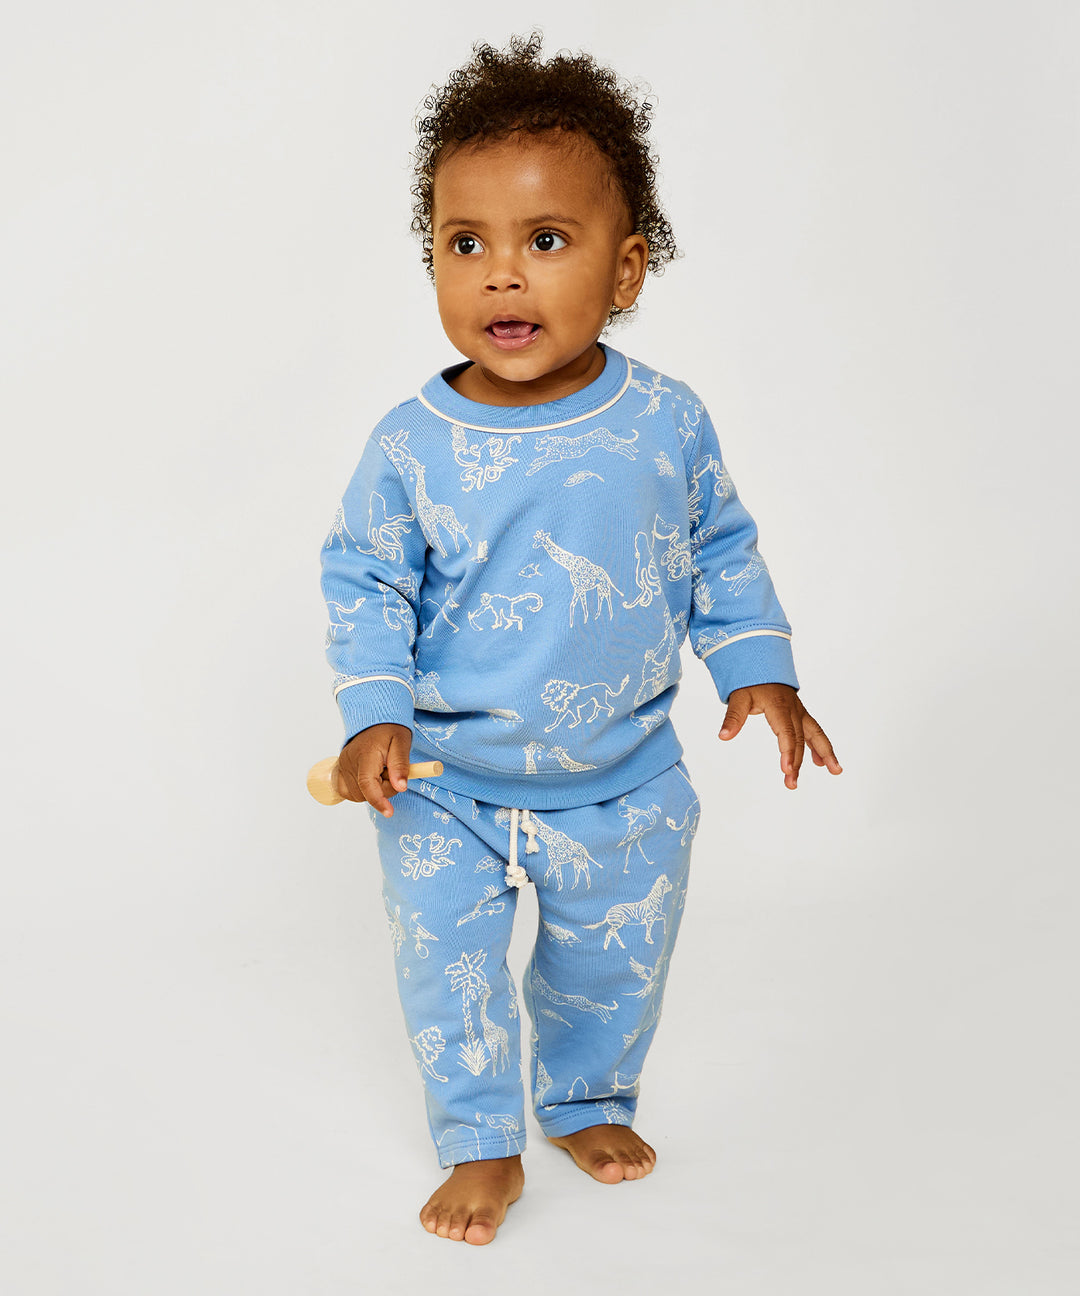 Newborn Clothing and Baby Clothing | Oso & Me